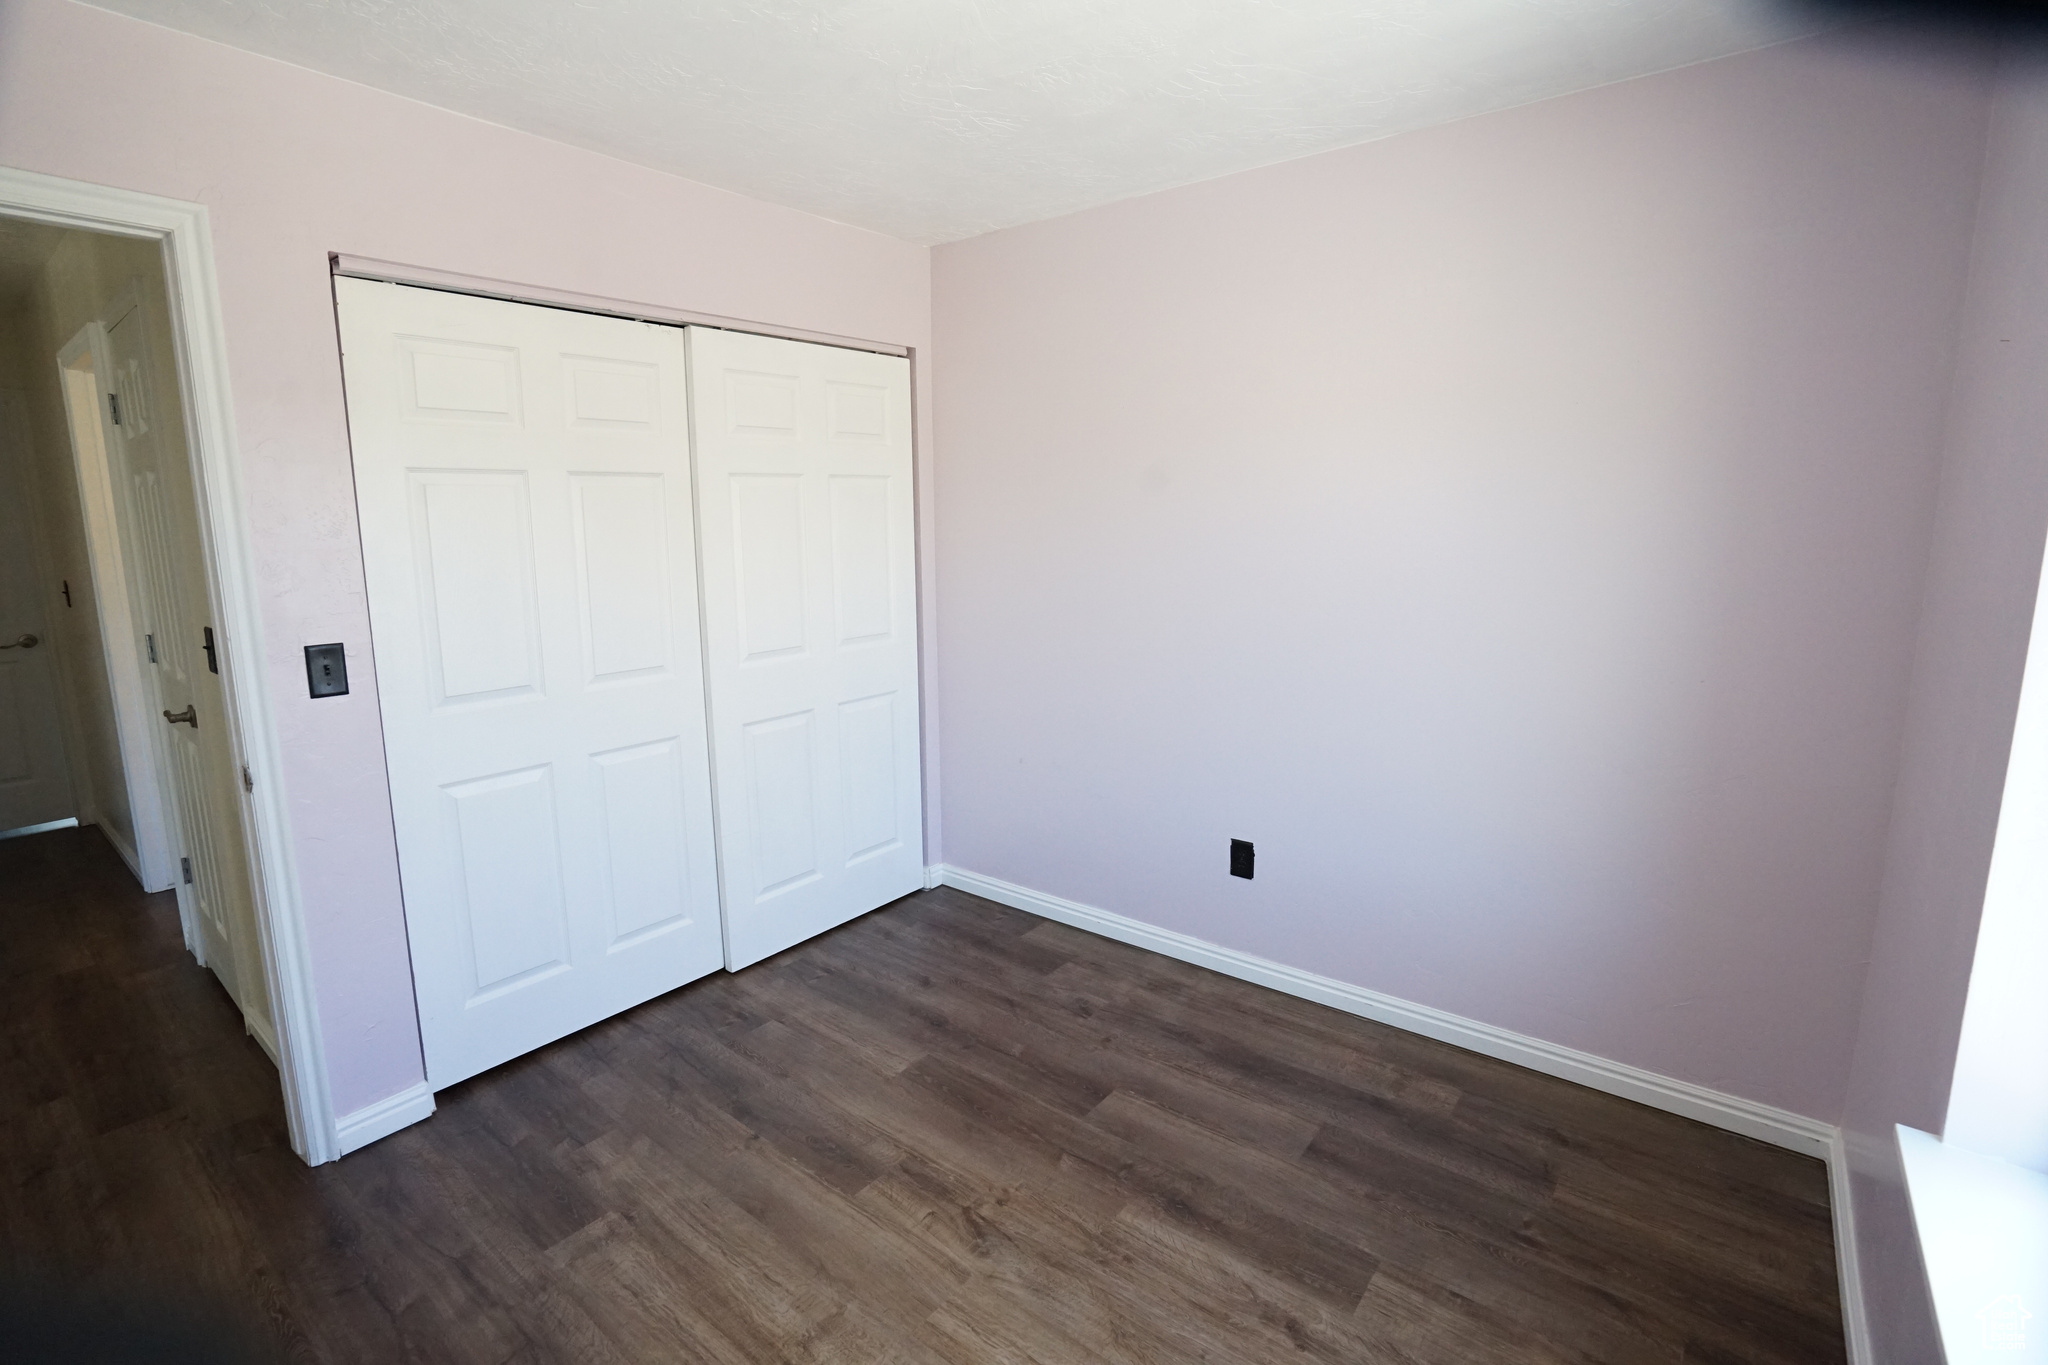 Unfurnished bedroom with dark wood-type flooring and a closet